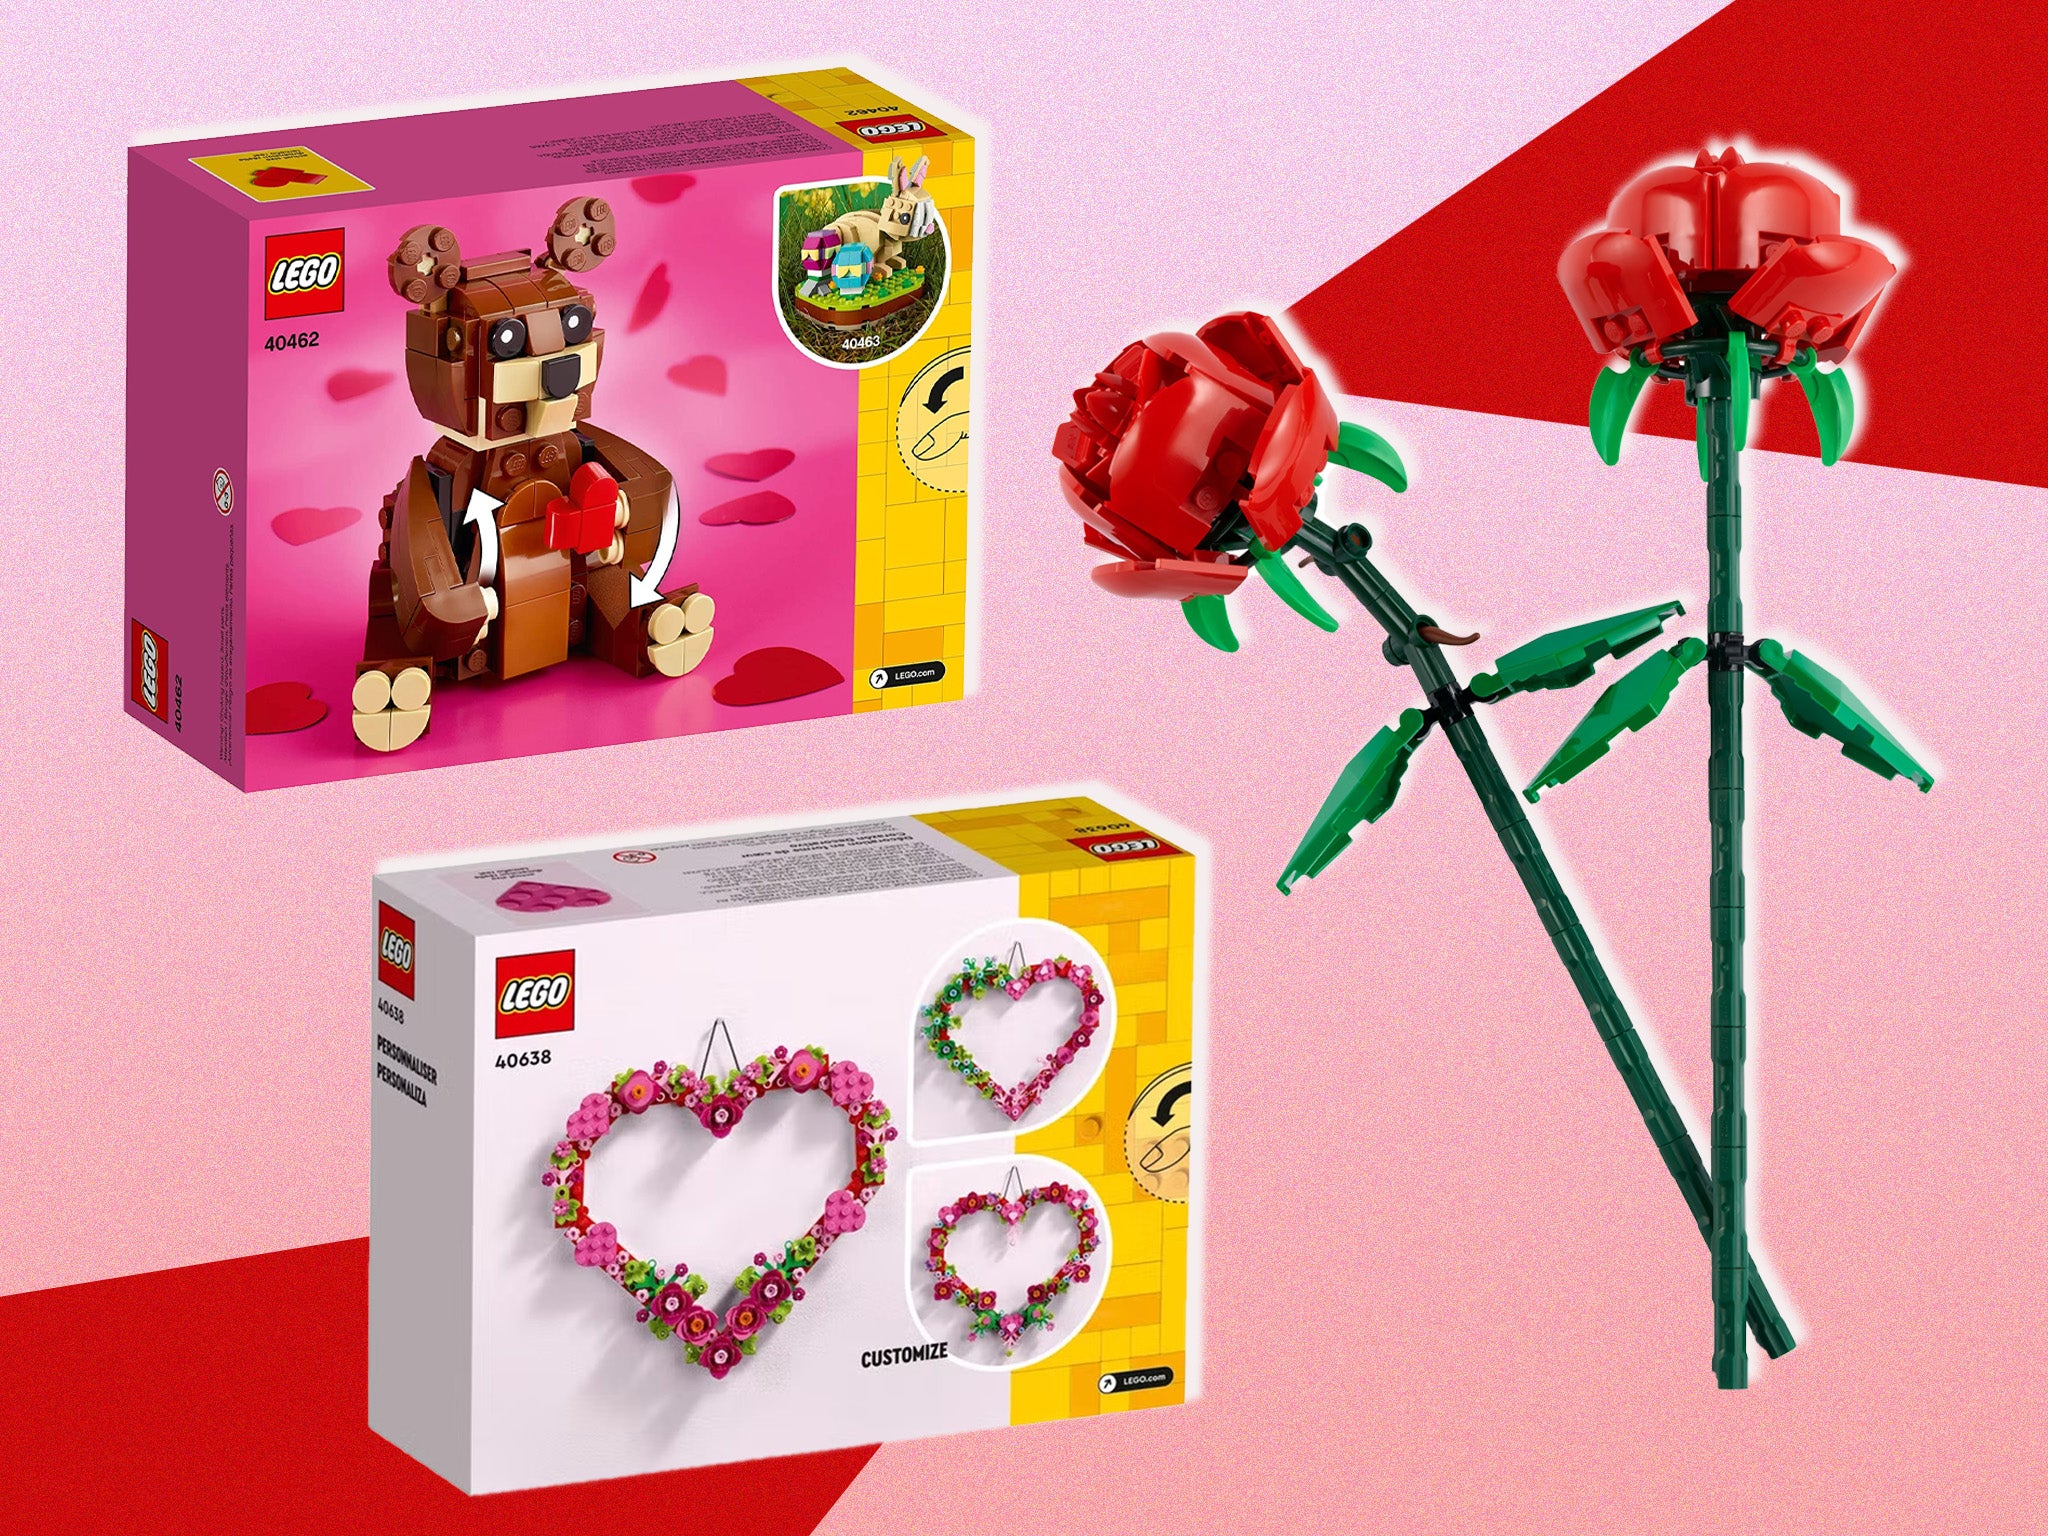 Lego’s love-themed sets are perfect for gifting this Valentine’s Day